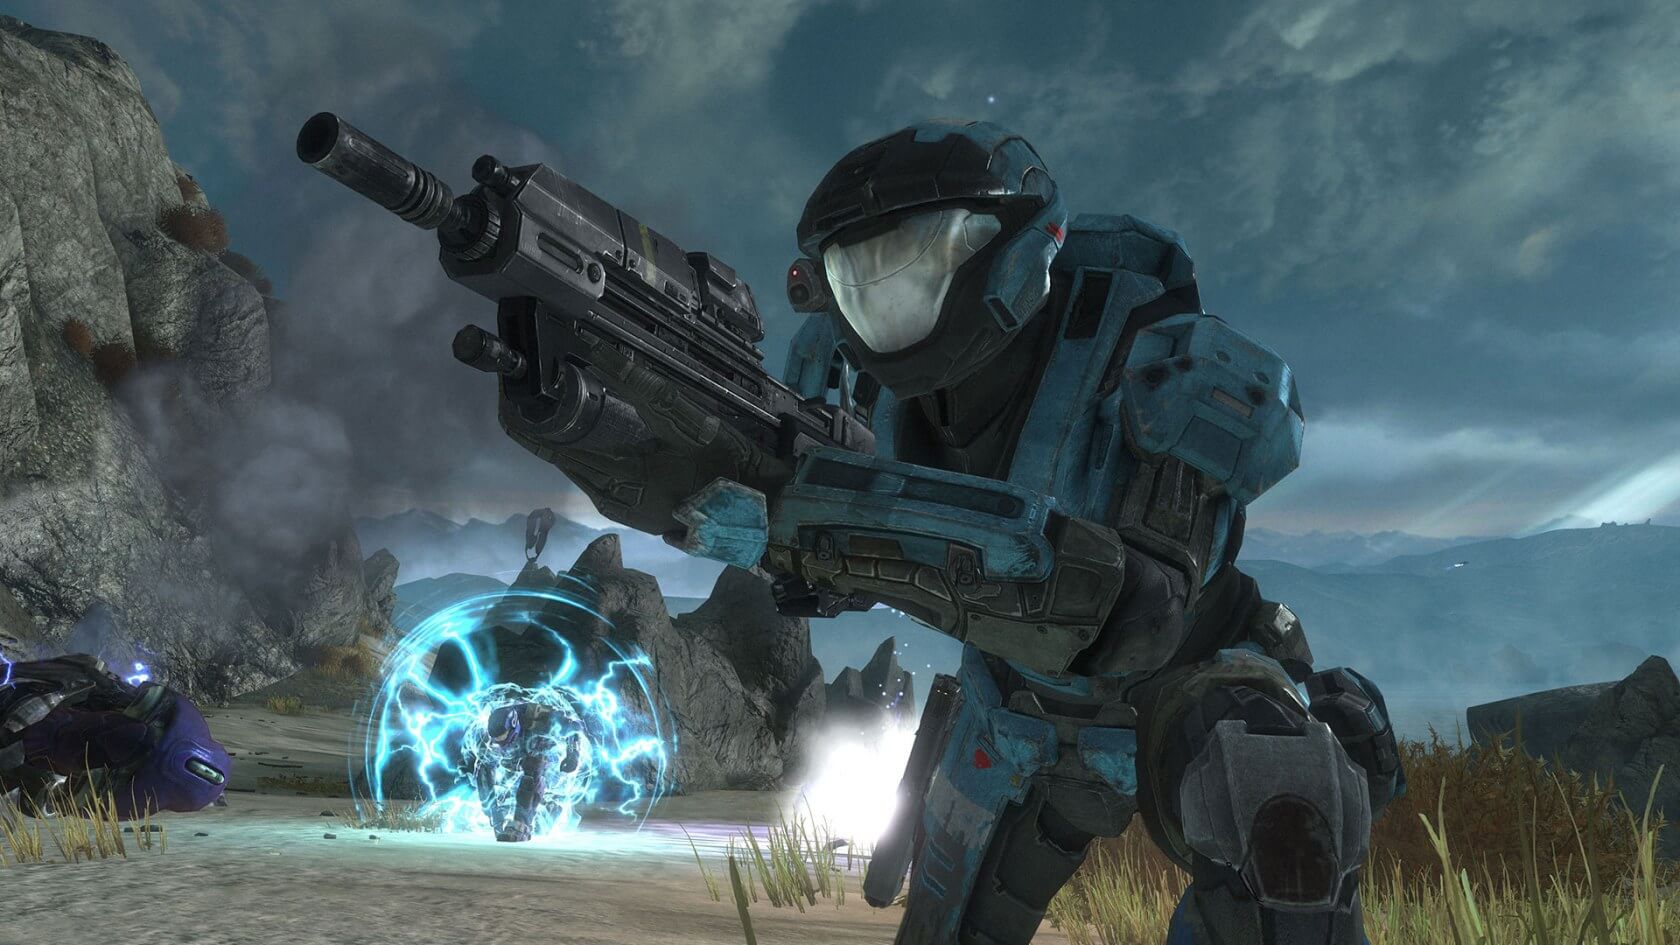 Halo: Reach is reportedly coming to PC on December 3